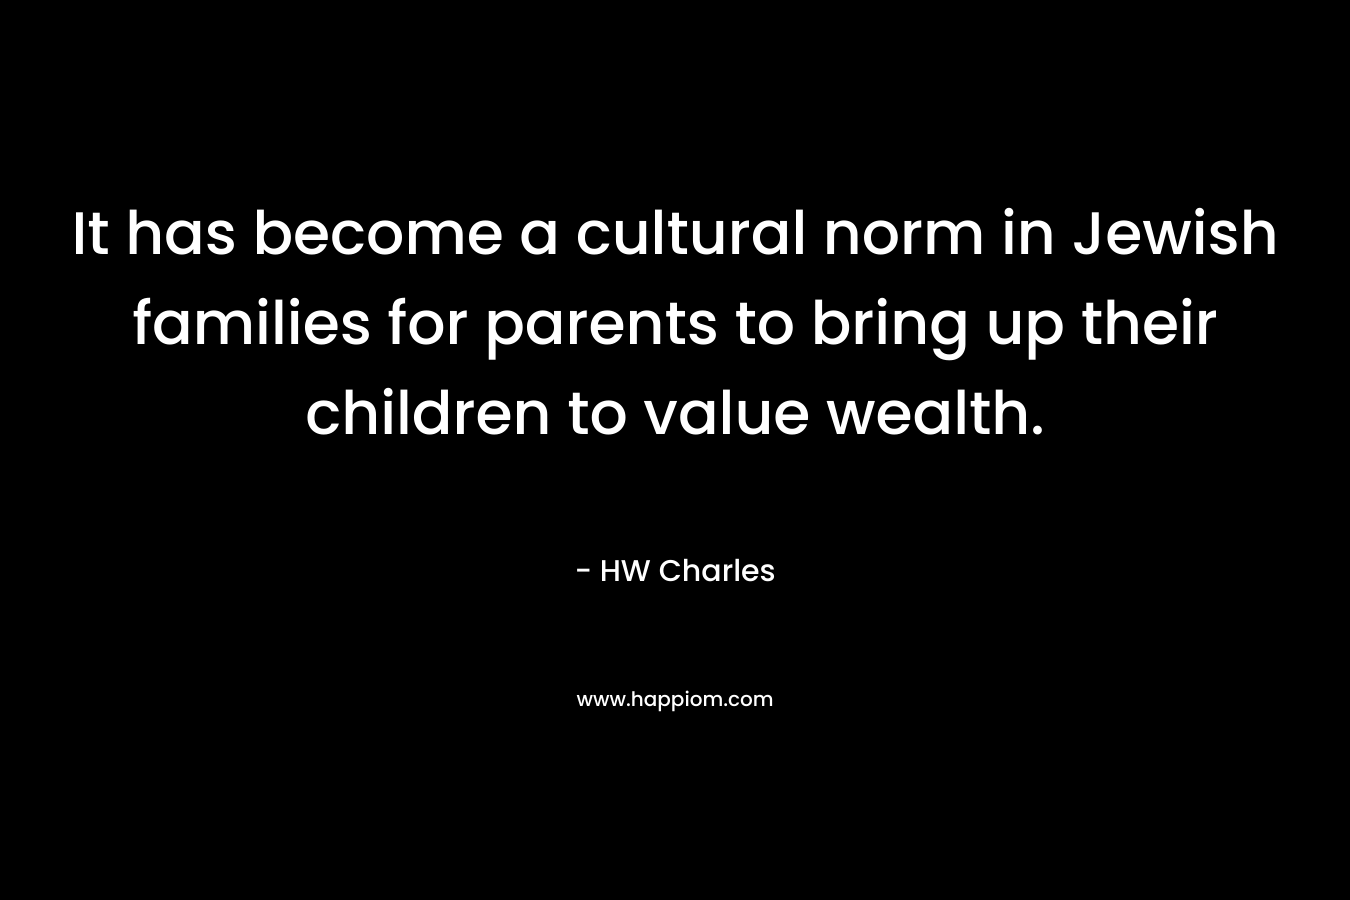 It has become a cultural norm in Jewish families for parents to bring up their children to value wealth.